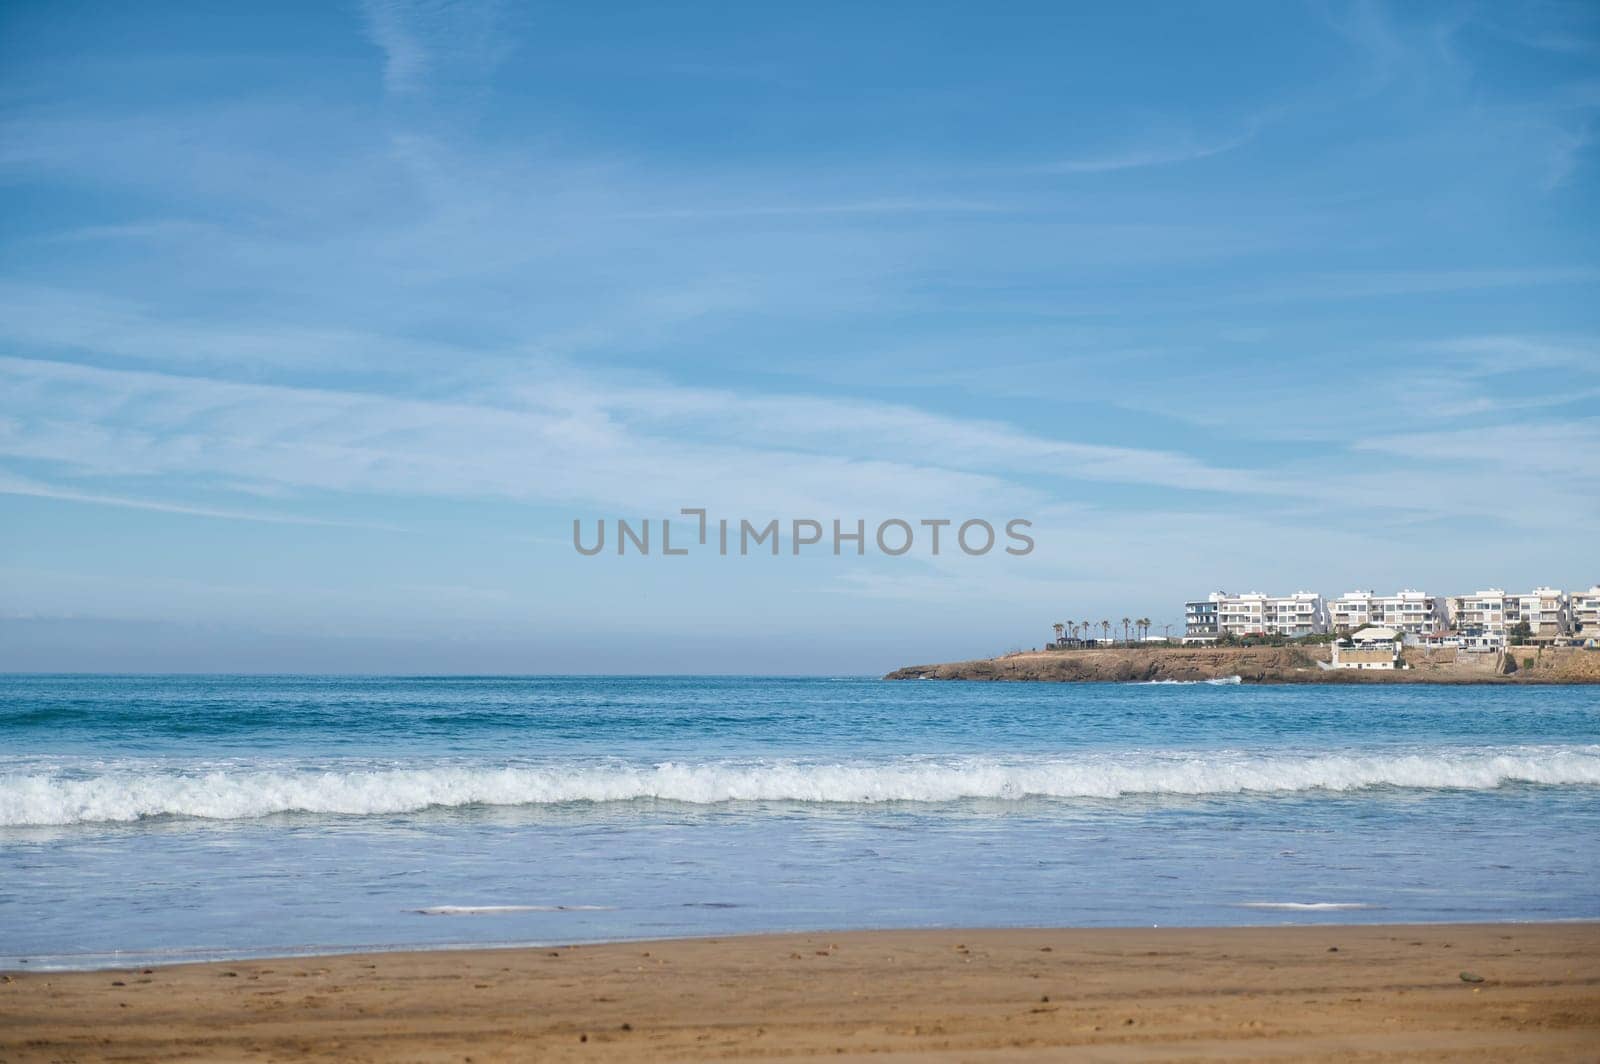 Nature background with seascape. Atlantic ocean. Waves pounding on the sandy beach against the background of white city